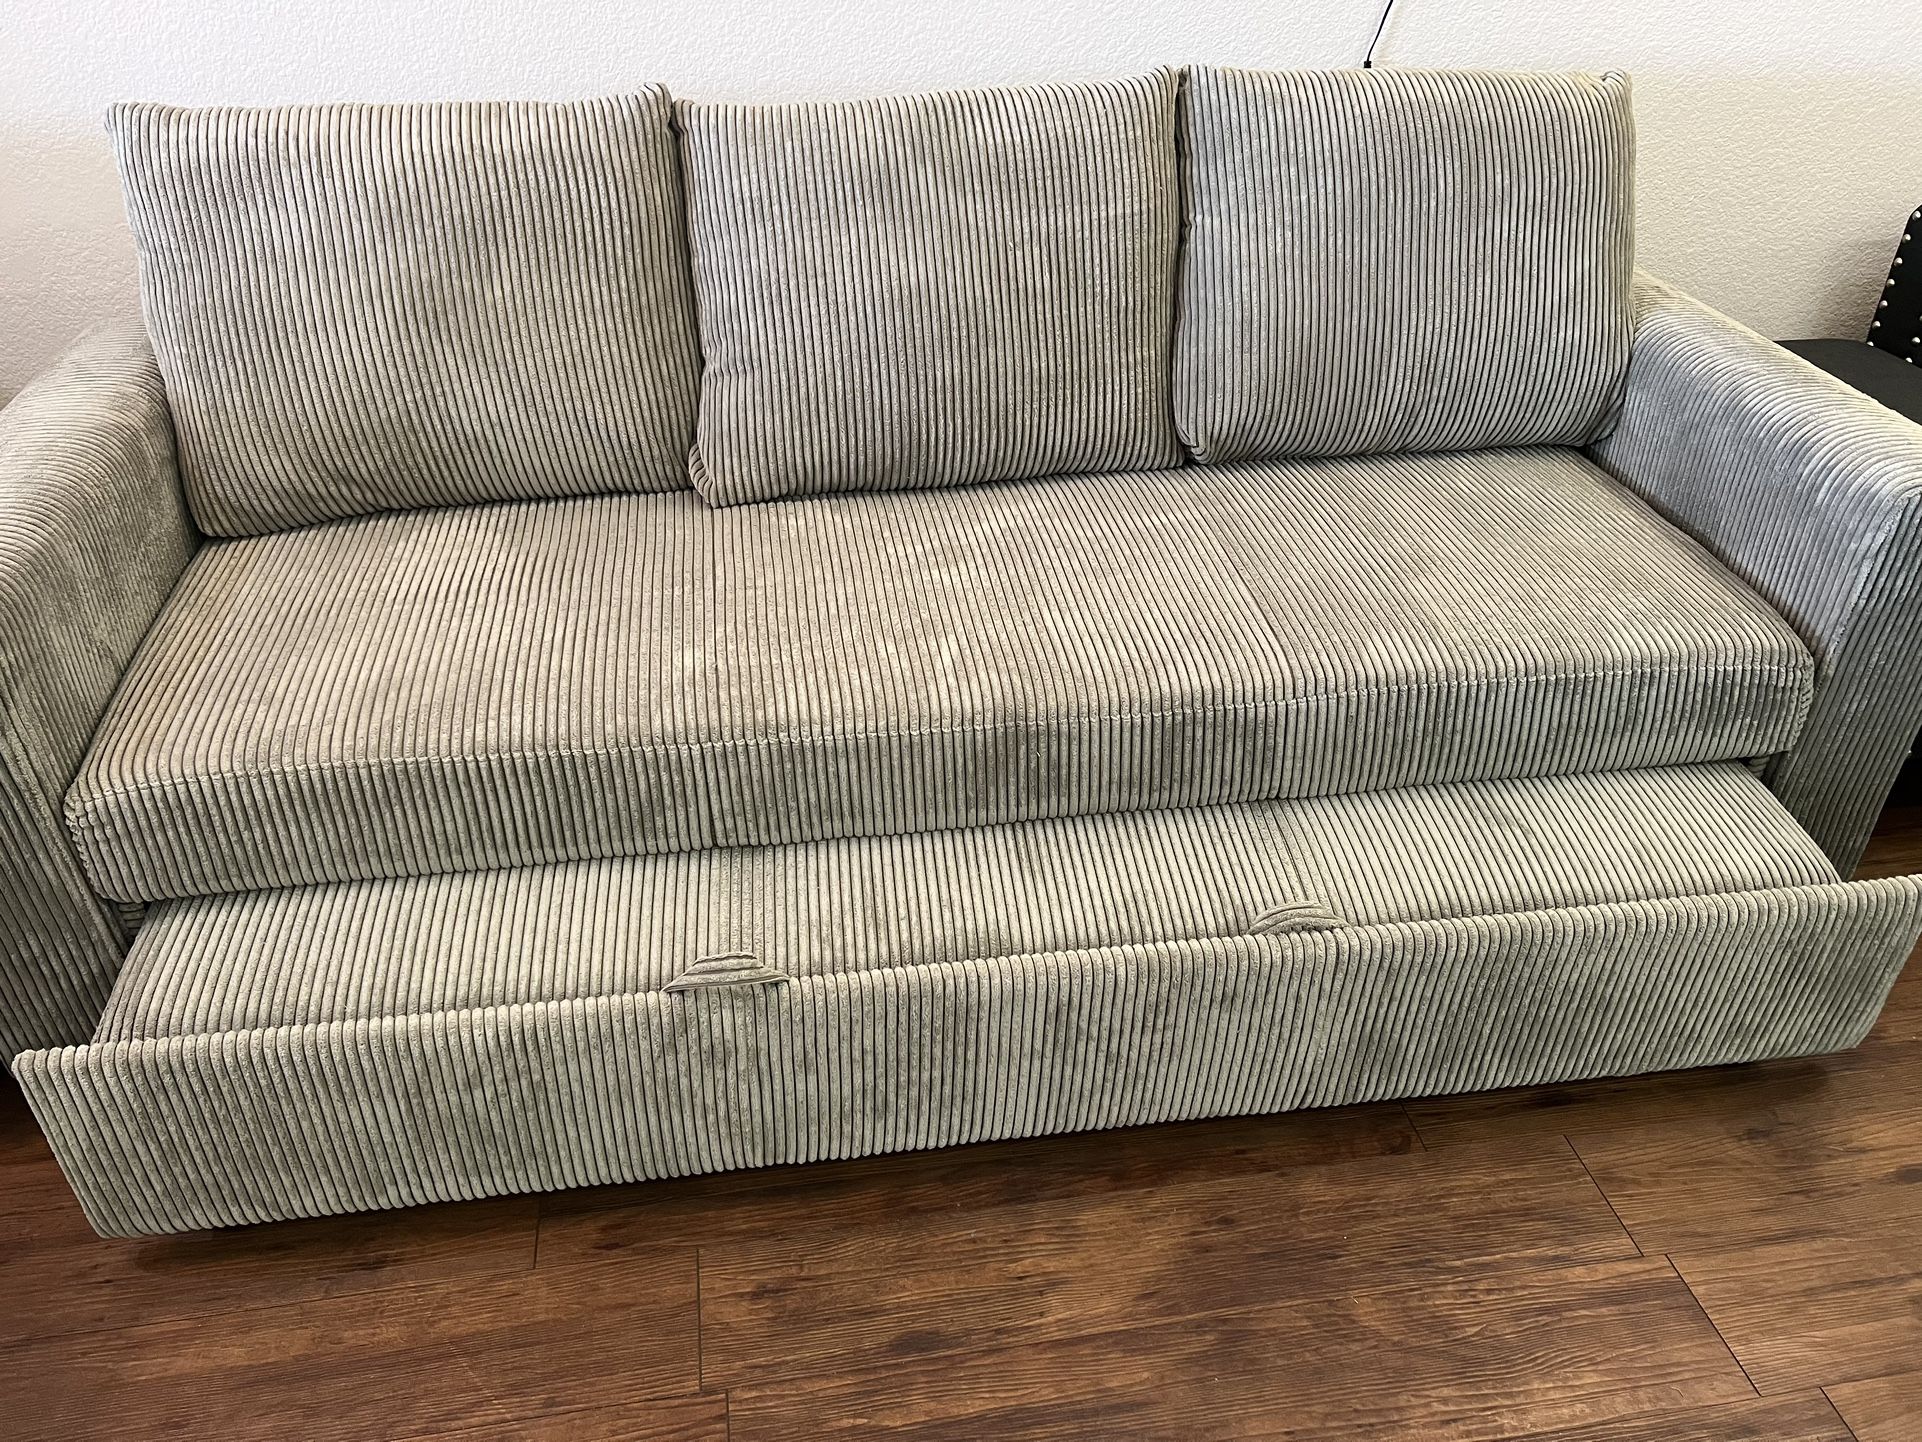 Brand New Sofa Bed 